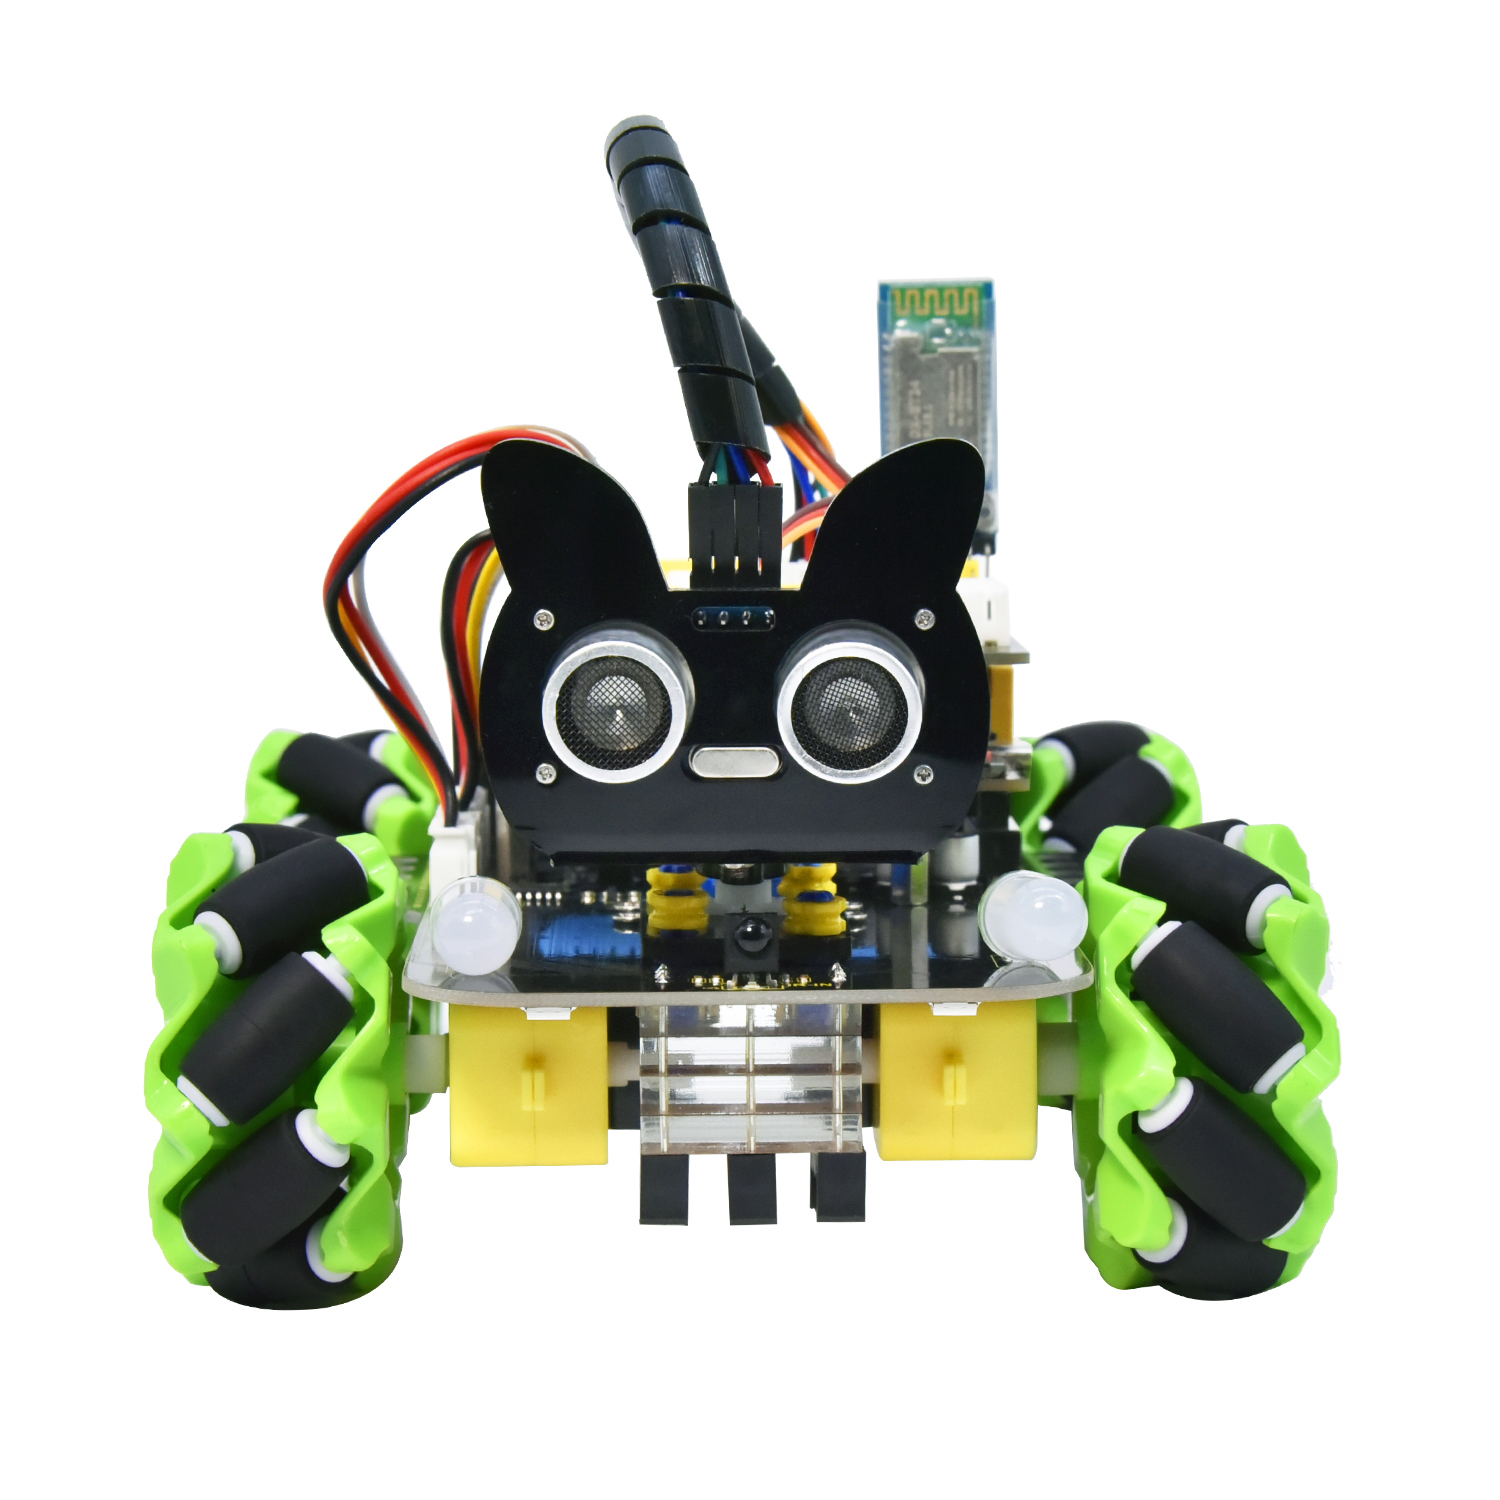 Smart Car Robot,4WD Programmable DIY Starter Kit for Arduino for Uno  R3,Electronics Programming Project/STEM Educational/Science